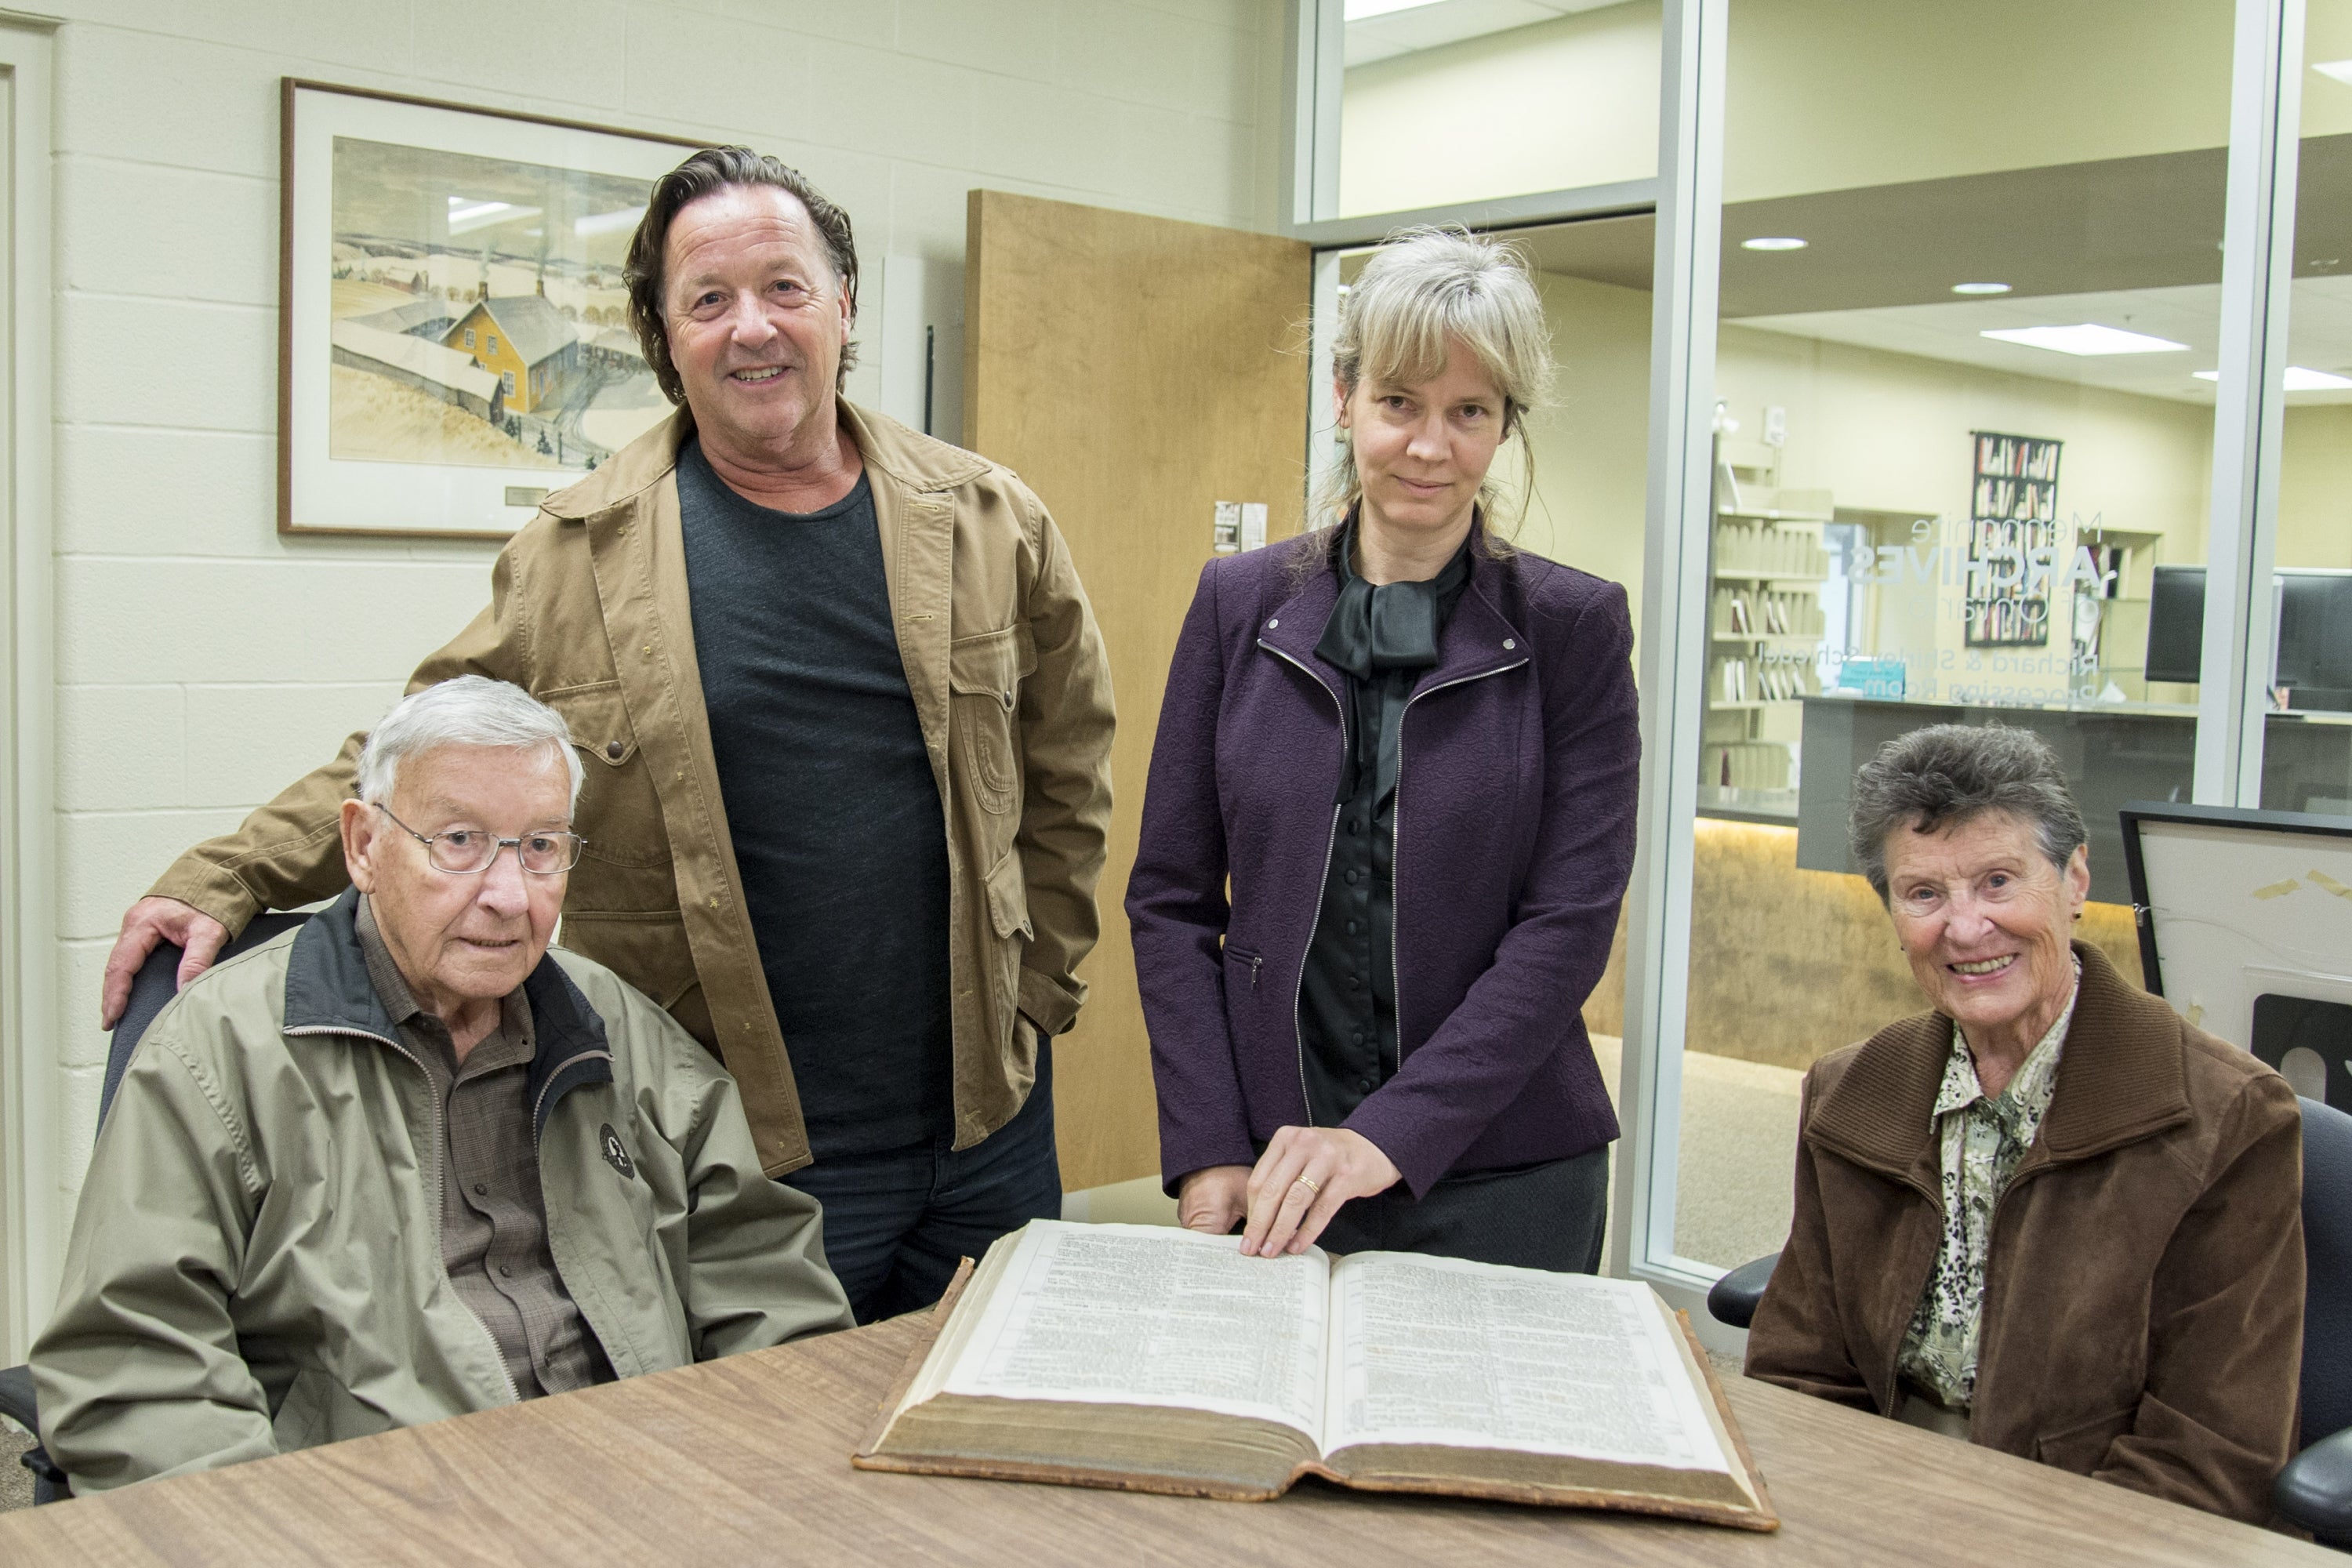 The Mennonite Archives of Ontario will consider Bibles for the collection if: 1) They have an intrinsic Mennonite connection;  2) They have significant genealogical information entered into the Bible; 3) They do not duplicate current holdings.